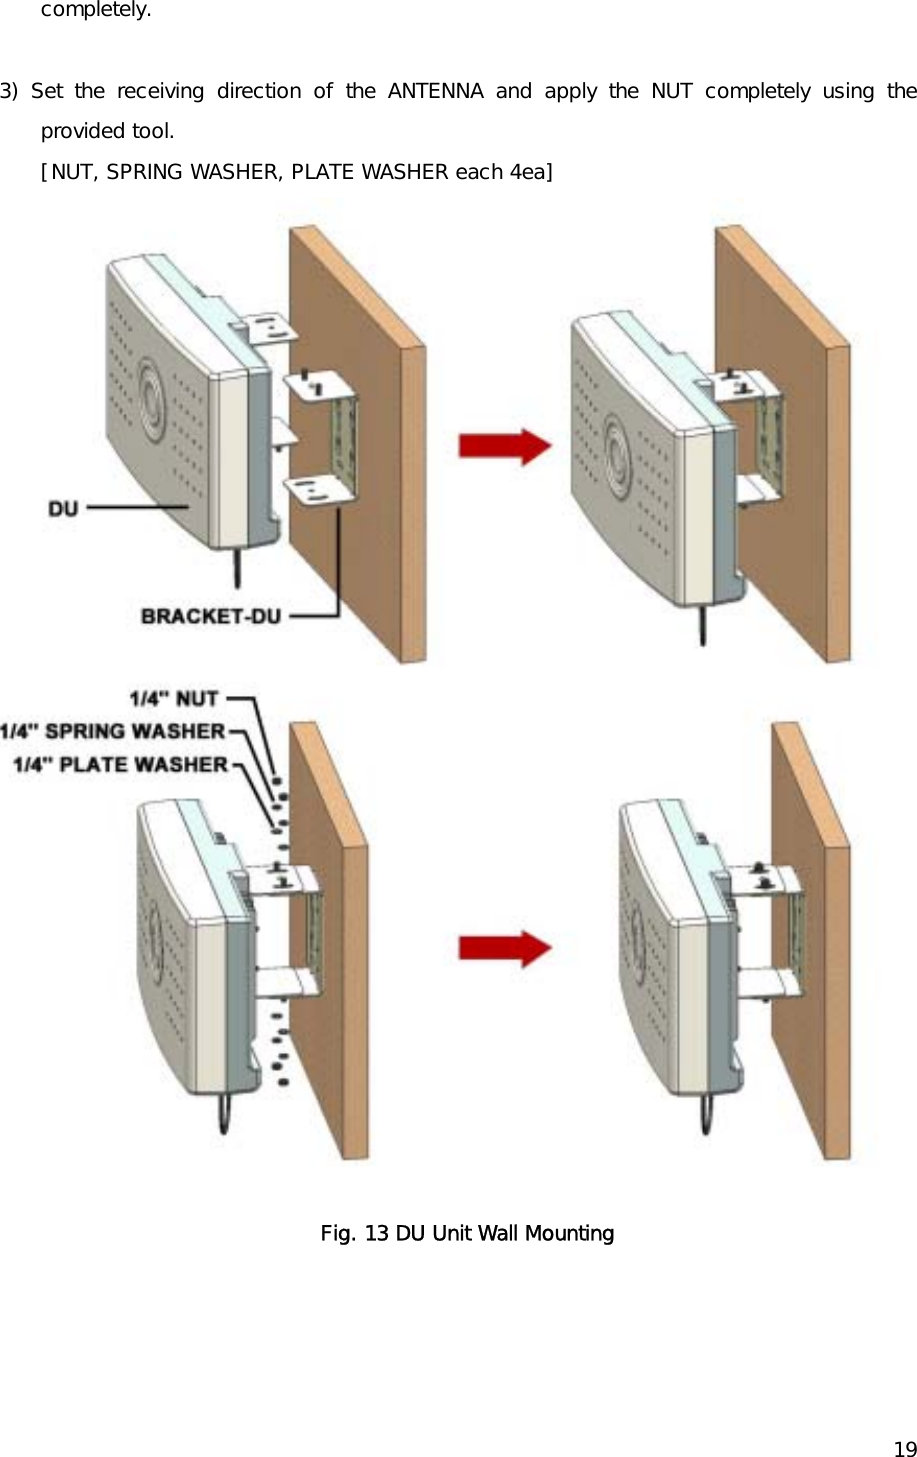    19completely.   3) Set the receiving direction of the ANTENNA and apply the NUT completely using the provided tool. [NUT, SPRING WASHER, PLATE WASHER each 4ea]  Fig. 13 DU Unit Wall Mounting   